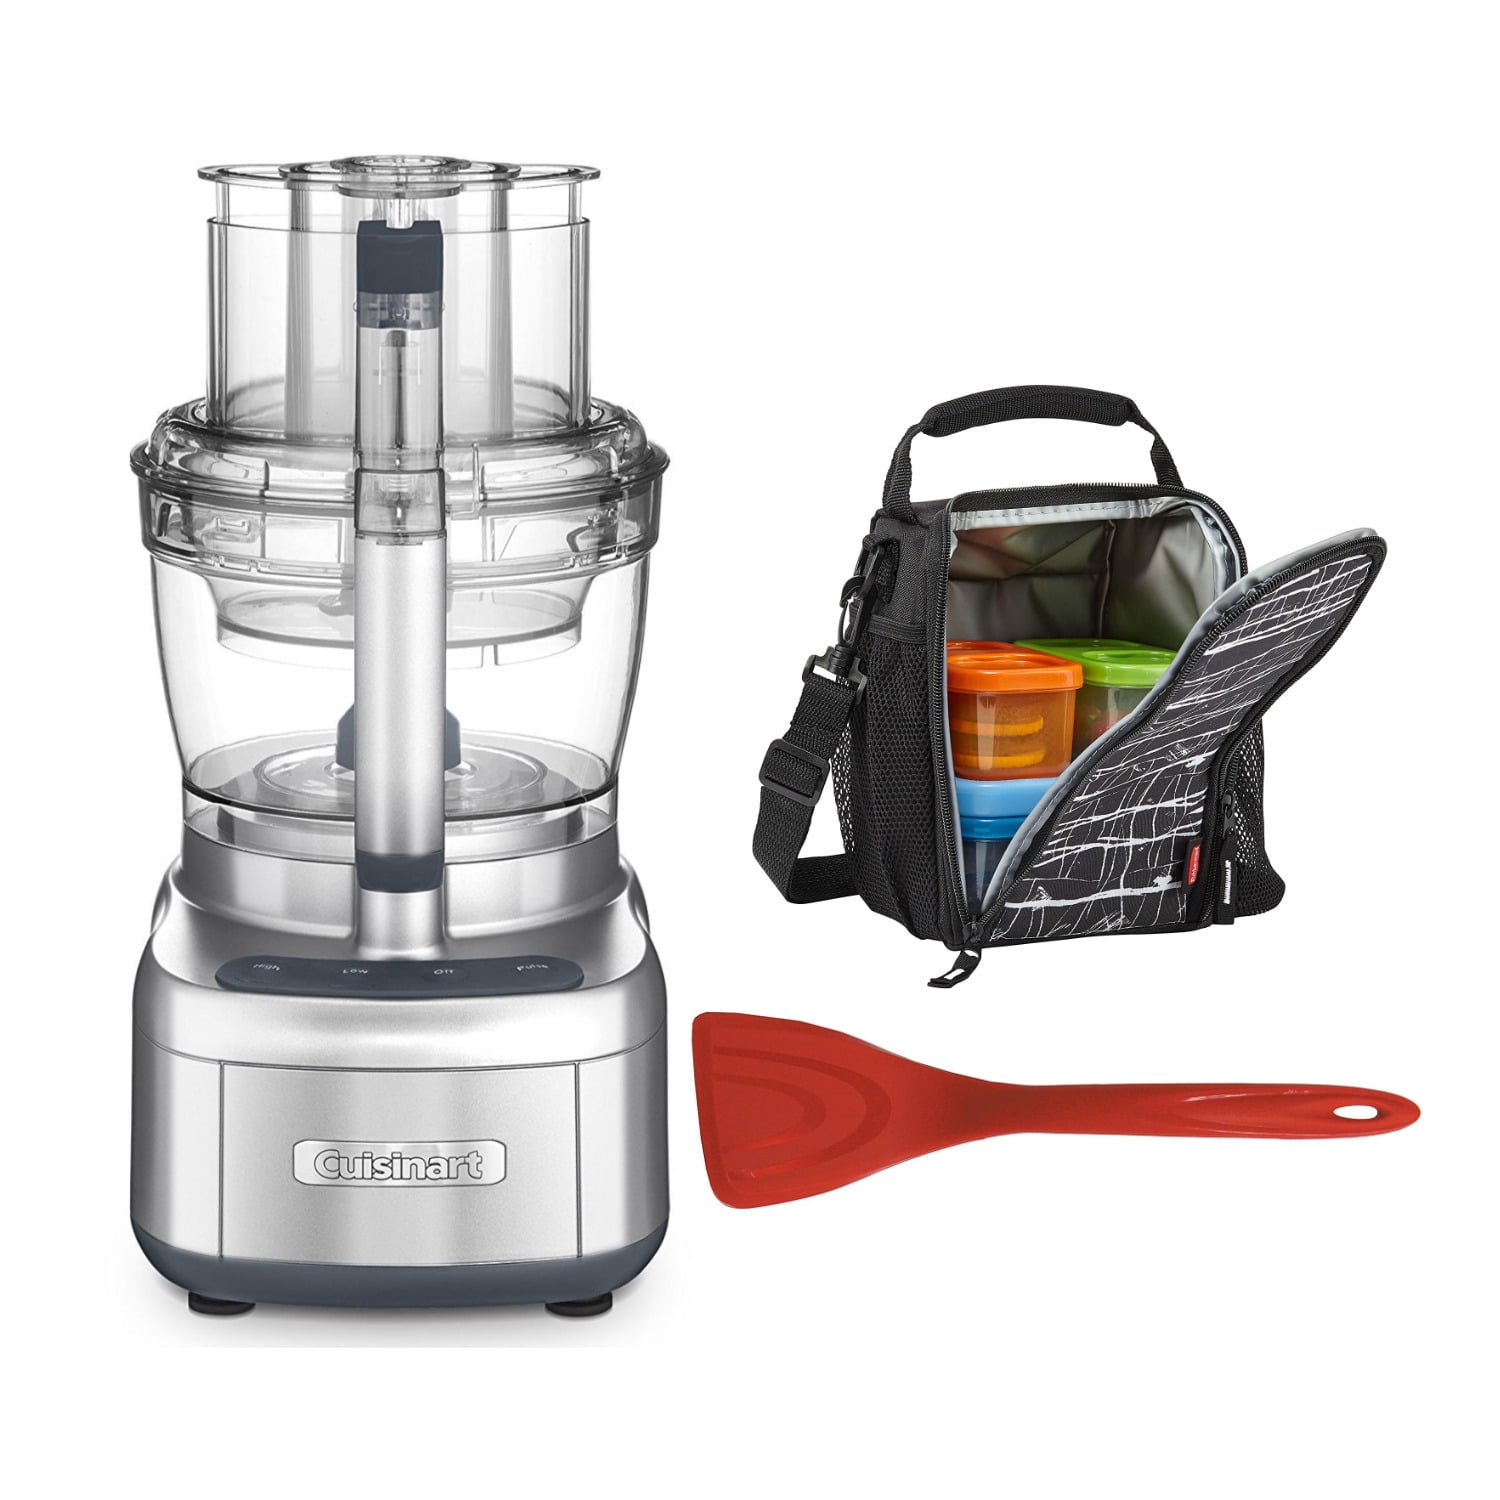 Details about   Cuisinart FP-13DSV Elemental 13 Cup Food Processor Silver with Containers Bundle 